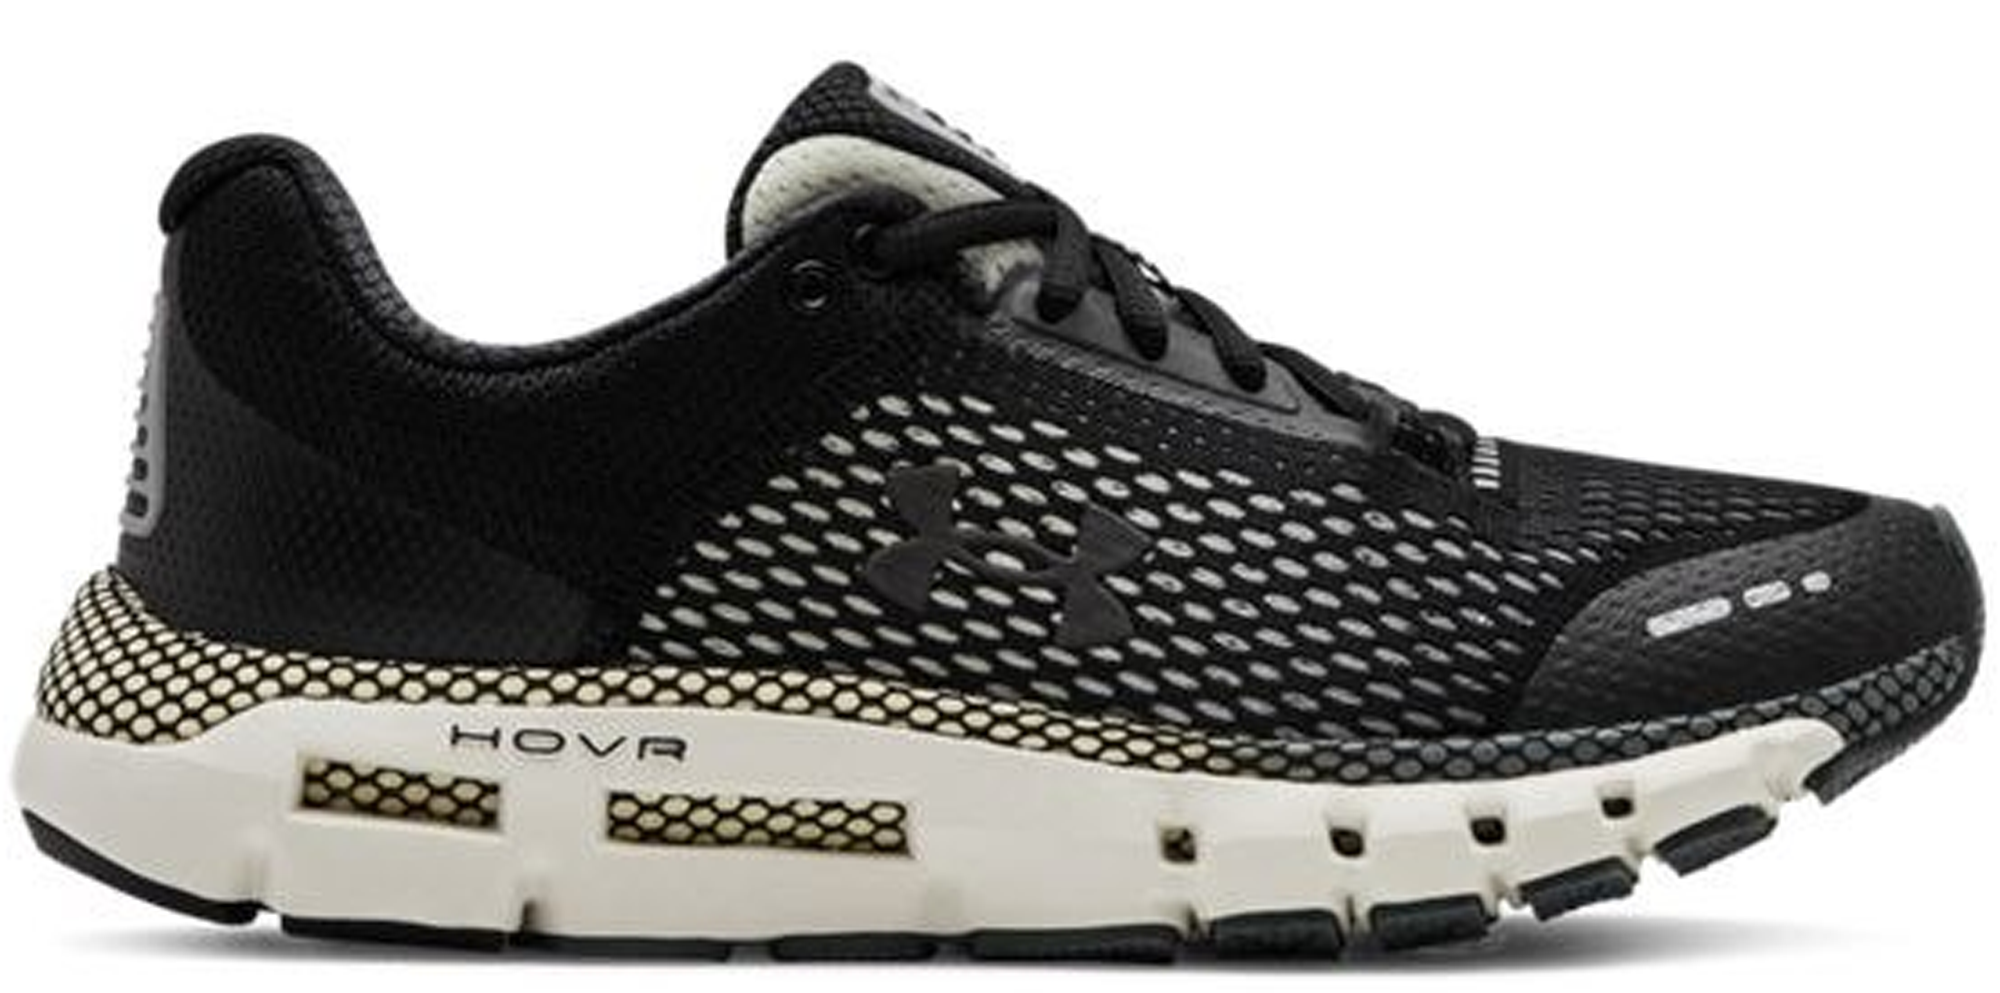 under armour hovr black and white